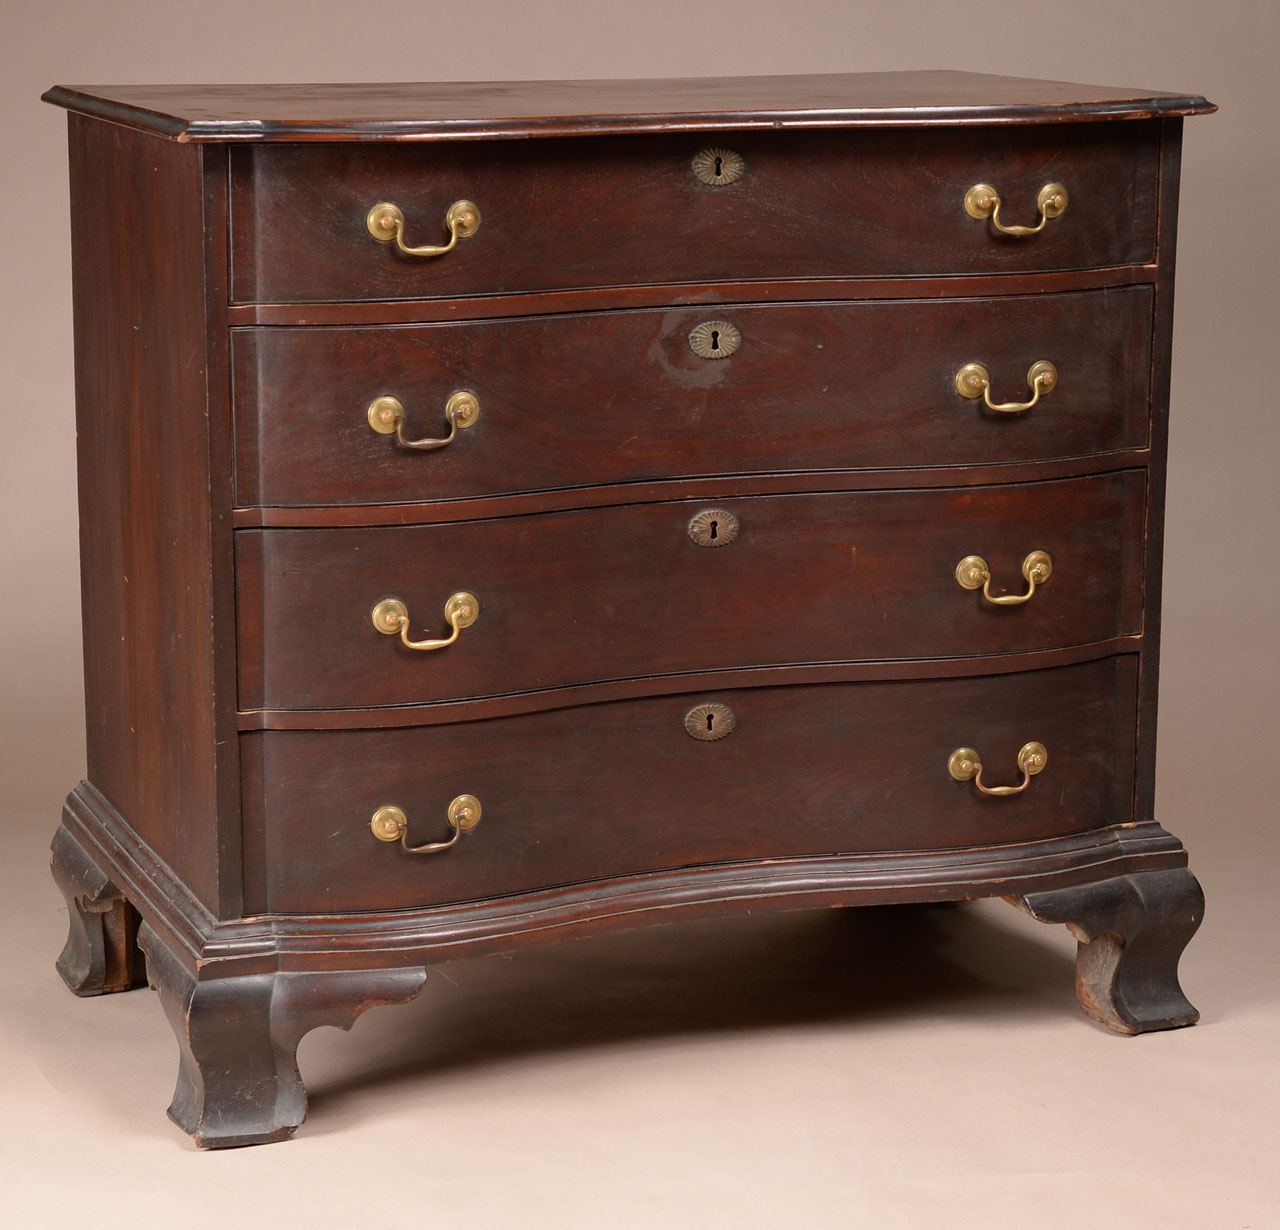 A very fine Chippendale four drawer chest